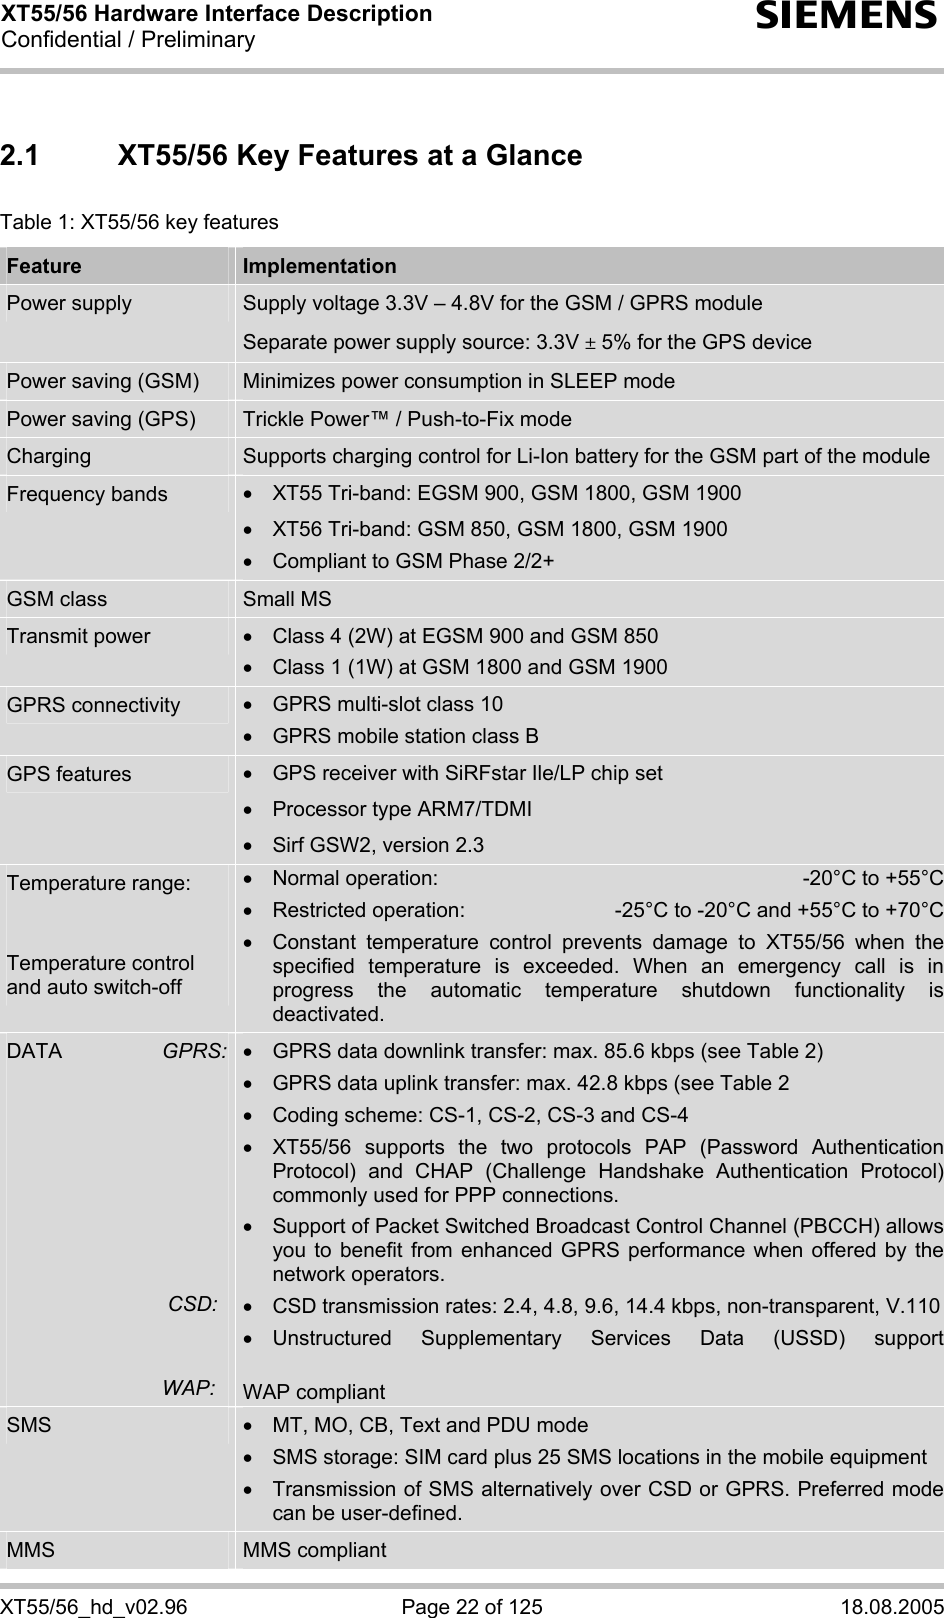 XT55/56 Hardware Interface Description Confidential / Preliminary s XT55/56_hd_v02.96  Page 22 of 125  18.08.2005 2.1  XT55/56 Key Features at a Glance Table 1: XT55/56 key features  Feature  Implementation Power supply  Supply voltage 3.3V – 4.8V for the GSM / GPRS module Separate power supply source: 3.3V ± 5% for the GPS device Power saving (GSM)  Minimizes power consumption in SLEEP mode  Power saving (GPS)  Trickle Power™ / Push-to-Fix mode  Charging  Supports charging control for Li-Ion battery for the GSM part of the module Frequency bands  •  XT55 Tri-band: EGSM 900, GSM 1800, GSM 1900 •  XT56 Tri-band: GSM 850, GSM 1800, GSM 1900 •  Compliant to GSM Phase 2/2+ GSM class  Small MS Transmit power  •  Class 4 (2W) at EGSM 900 and GSM 850 •  Class 1 (1W) at GSM 1800 and GSM 1900 GPRS connectivity  •  GPRS multi-slot class 10 •  GPRS mobile station class B GPS features  •  GPS receiver with SiRFstar Ile/LP chip set •  Processor type ARM7/TDMI •  Sirf GSW2, version 2.3 Temperature range:                        Temperature control and auto switch-off •  Normal operation:   -20°C to +55°C •  Restricted operation:   -25°C to -20°C and +55°C to +70°C•  Constant temperature control prevents damage to XT55/56 when the specified temperature is exceeded. When an emergency call is in progress the automatic temperature shutdown functionality is deactivated. DATA  GPRS:           CSD:    WAP: •  GPRS data downlink transfer: max. 85.6 kbps (see Table 2) •  GPRS data uplink transfer: max. 42.8 kbps (see Table 2 •  Coding scheme: CS-1, CS-2, CS-3 and CS-4 •  XT55/56 supports the two protocols PAP (Password Authentication Protocol) and CHAP (Challenge Handshake Authentication Protocol) commonly used for PPP connections. •  Support of Packet Switched Broadcast Control Channel (PBCCH) allows you to benefit from enhanced GPRS performance when offered by the network operators.  •  CSD transmission rates: 2.4, 4.8, 9.6, 14.4 kbps, non-transparent, V.110• Unstructured Supplementary Services Data (USSD) support  WAP compliant SMS  •  MT, MO, CB, Text and PDU mode •  SMS storage: SIM card plus 25 SMS locations in the mobile equipment •  Transmission of SMS alternatively over CSD or GPRS. Preferred mode can be user-defined. MMS  MMS compliant 